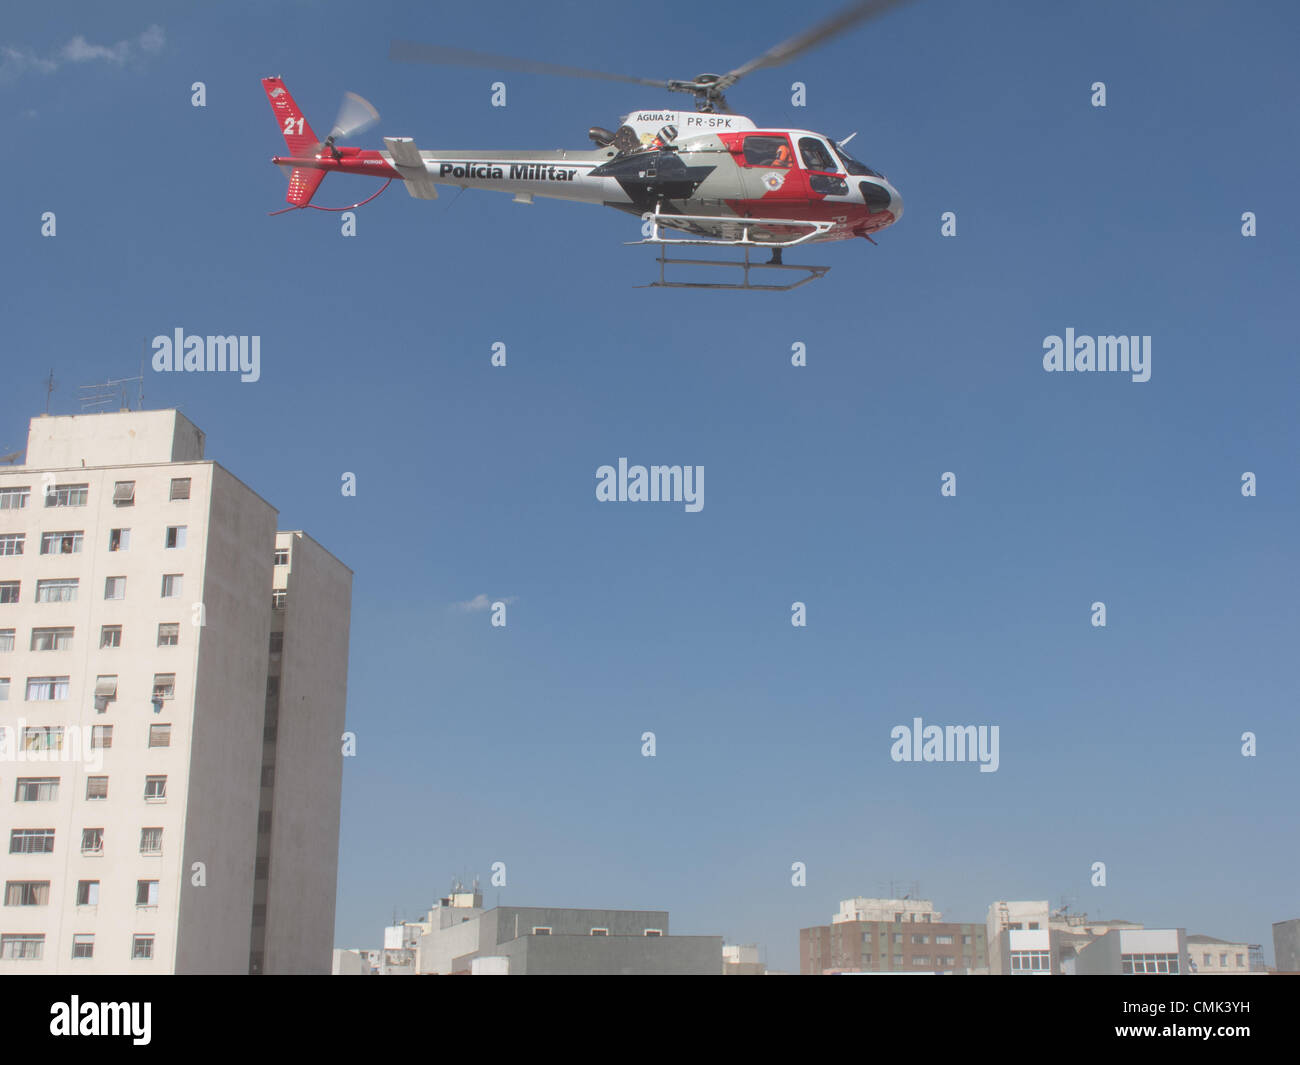 SAO PAULO, BRAZIL, 20th Aug, 2012. A helicopter of Policia Militar do Estado de Sao Paulo (PMESP) (Military Police of Sao Paulo State) hovers in San Paulo city, Brazil. Credit: Andre M. Chang/Alamy Live News Stock Photo